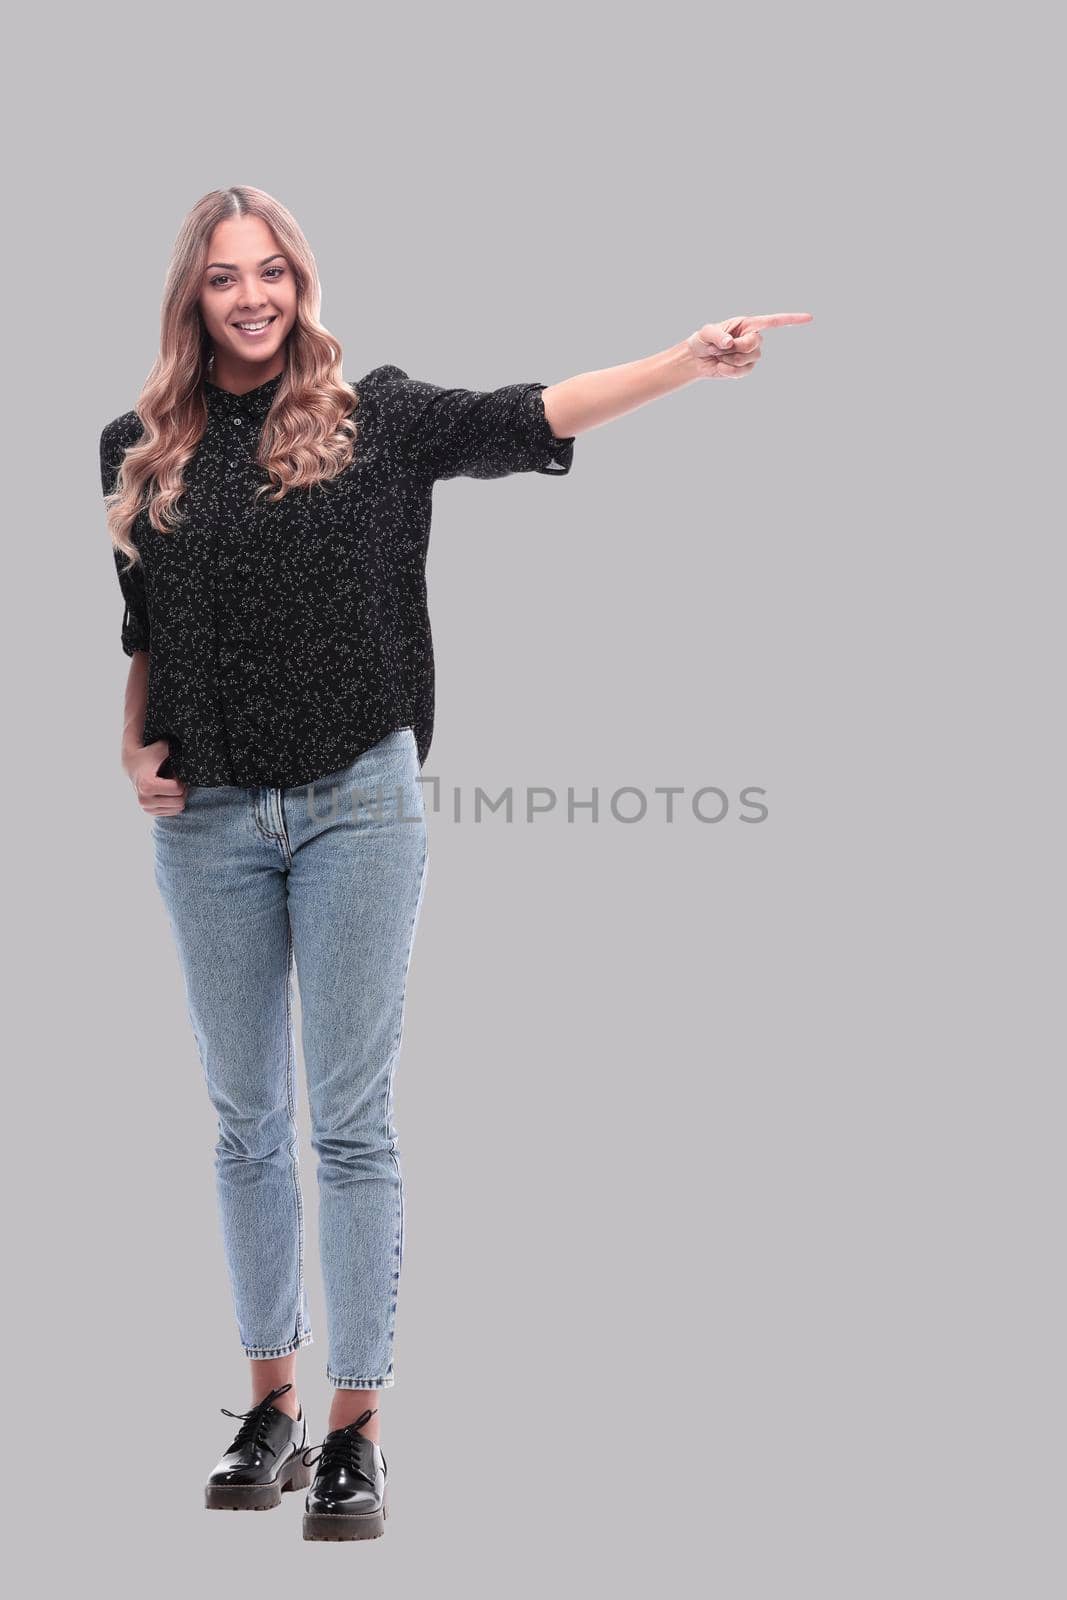 in full growth. attractive young woman pointing to copy space. isolated on white background